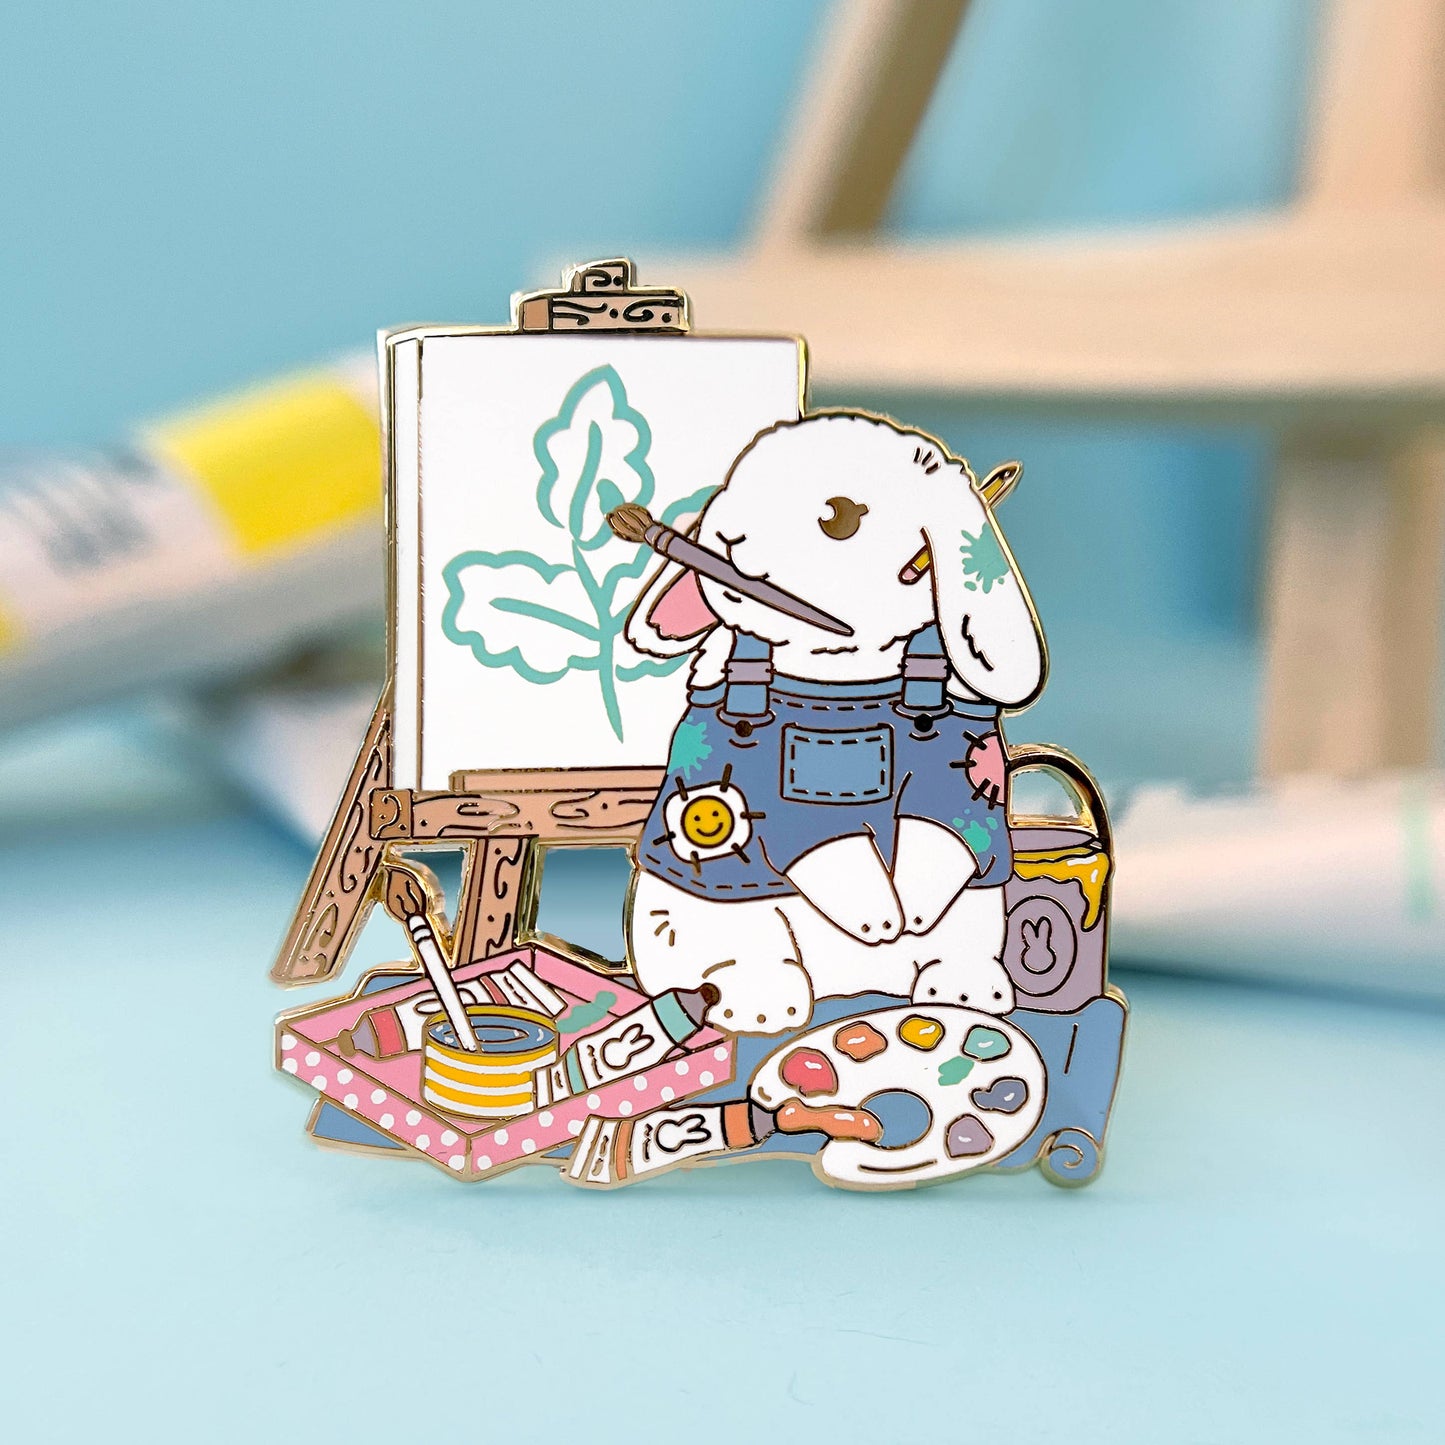 Artist Rabbit Enamel Pin - expected mid August - reserve now!